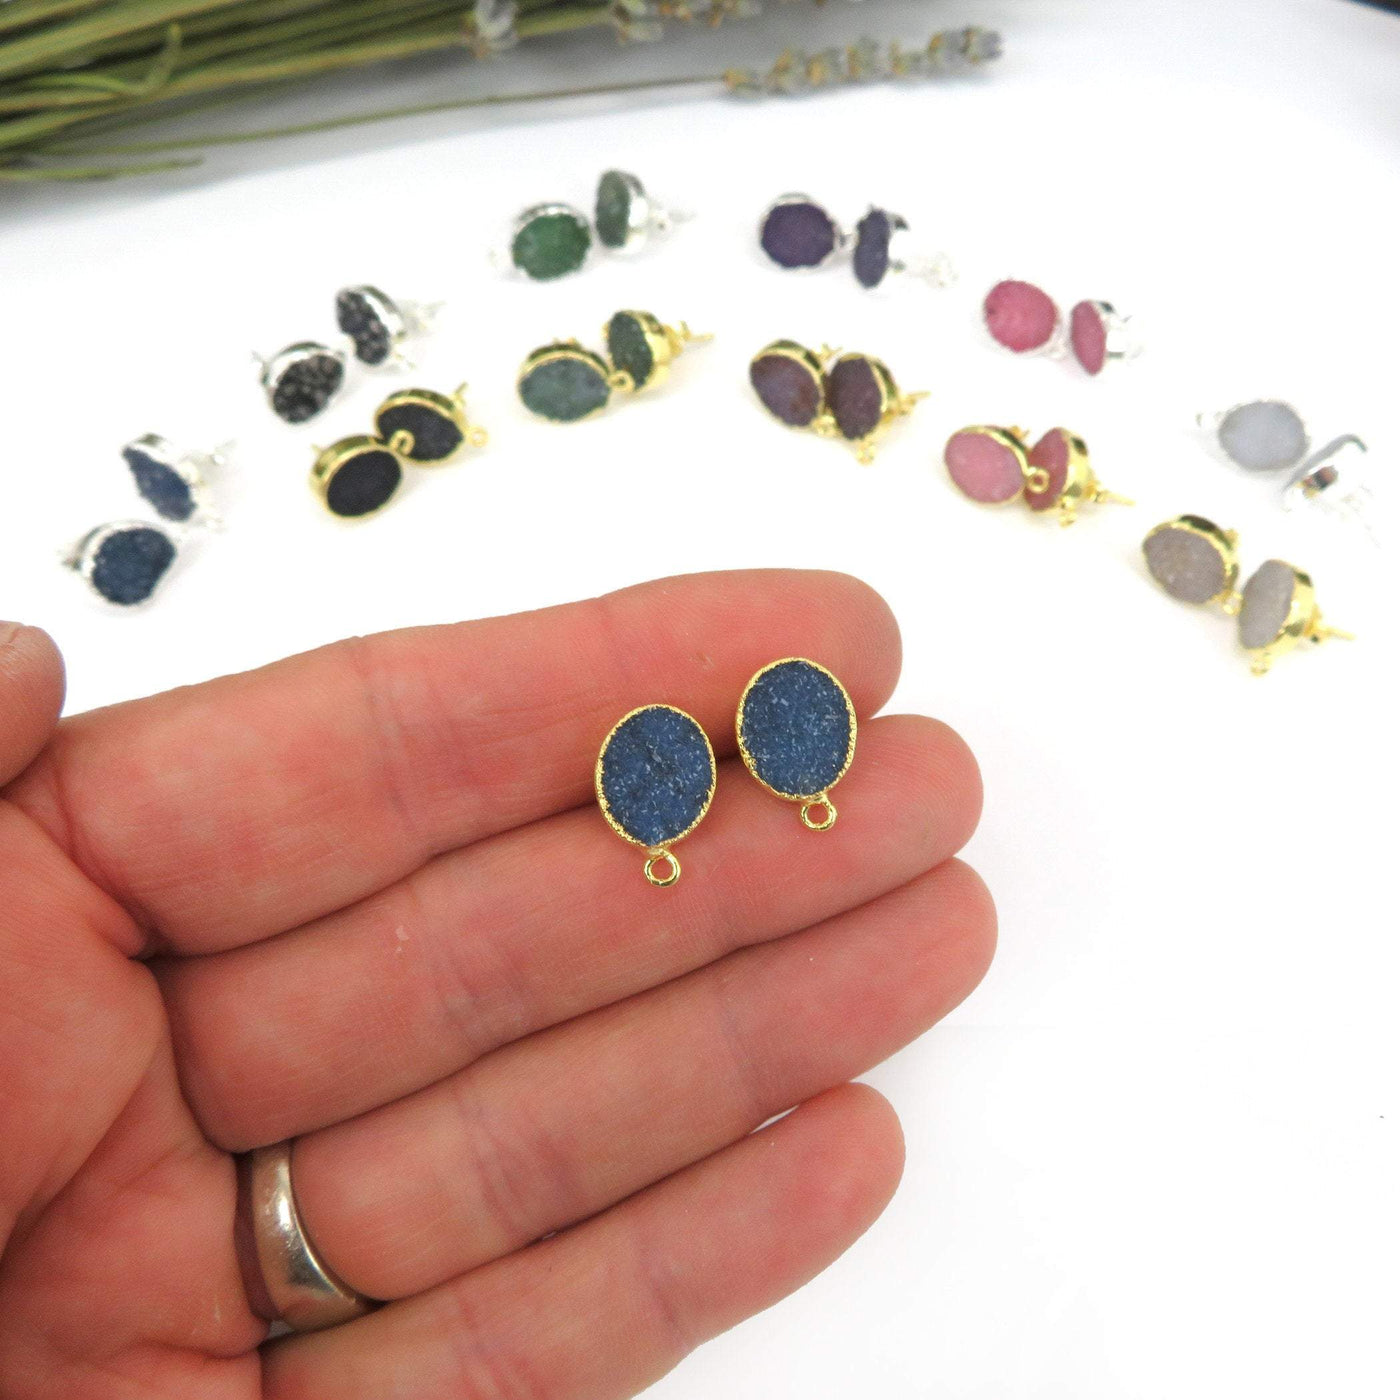 oval earrings displayed in hand for size reference